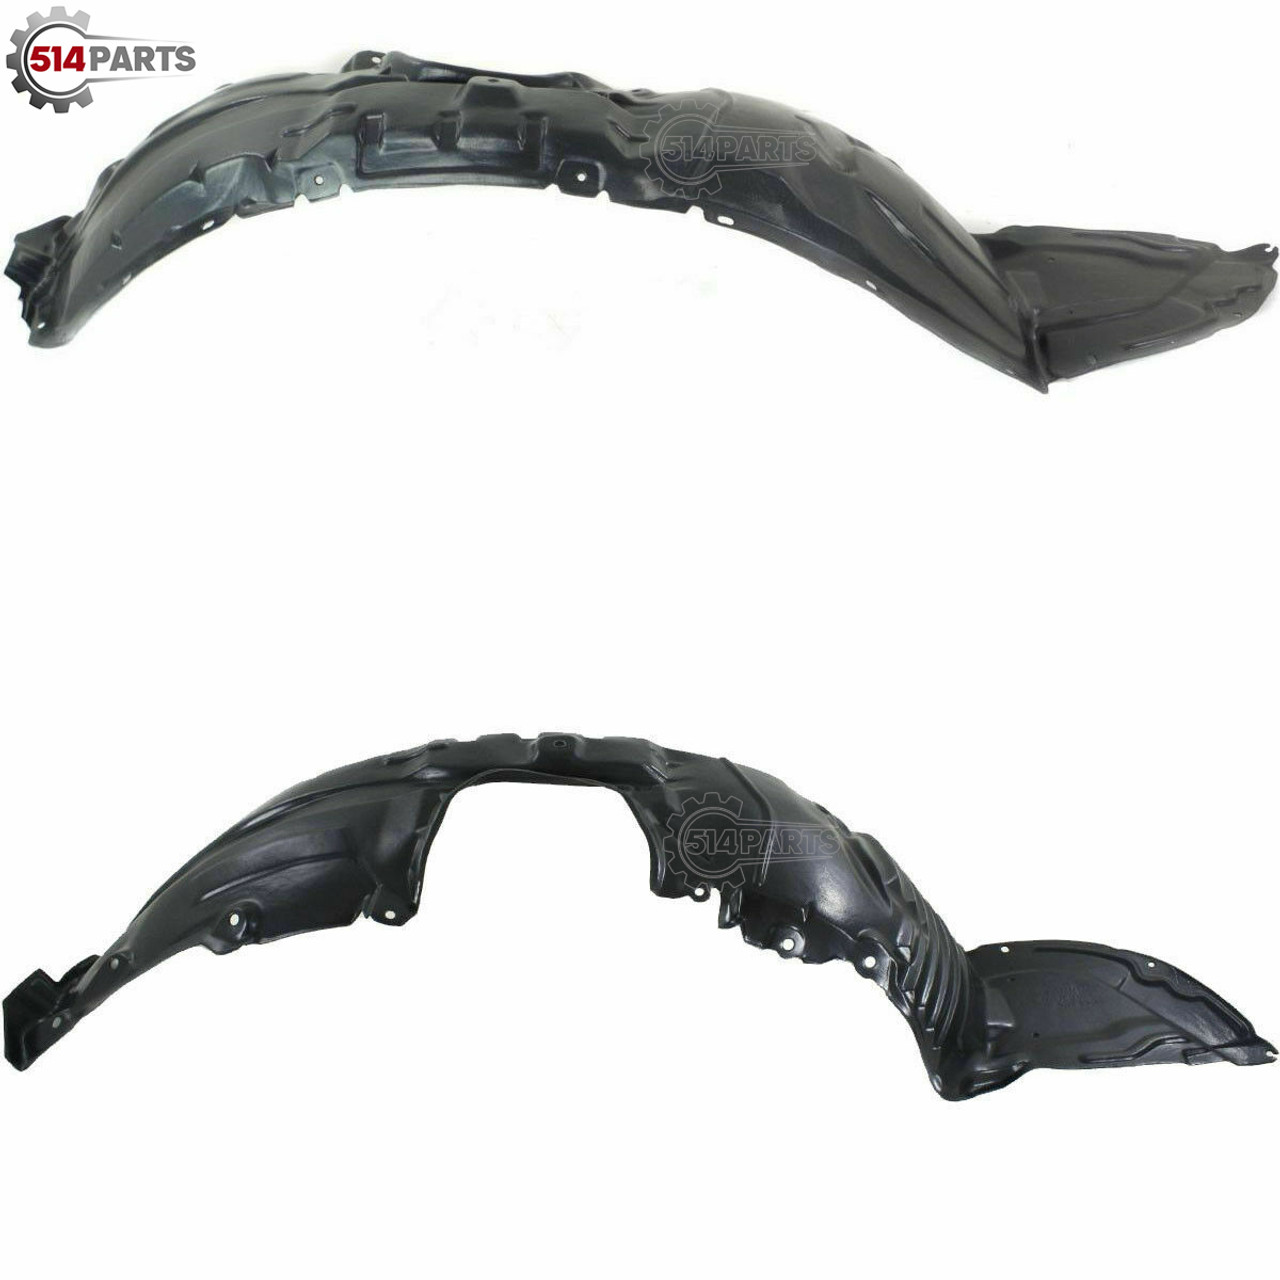 2010 - 2013 MAZDA 3 2.5L and MAZDA 3 SPORT 2.5L [2.0L 2012 -2013] FENDER LINER - FAUSSE AILES